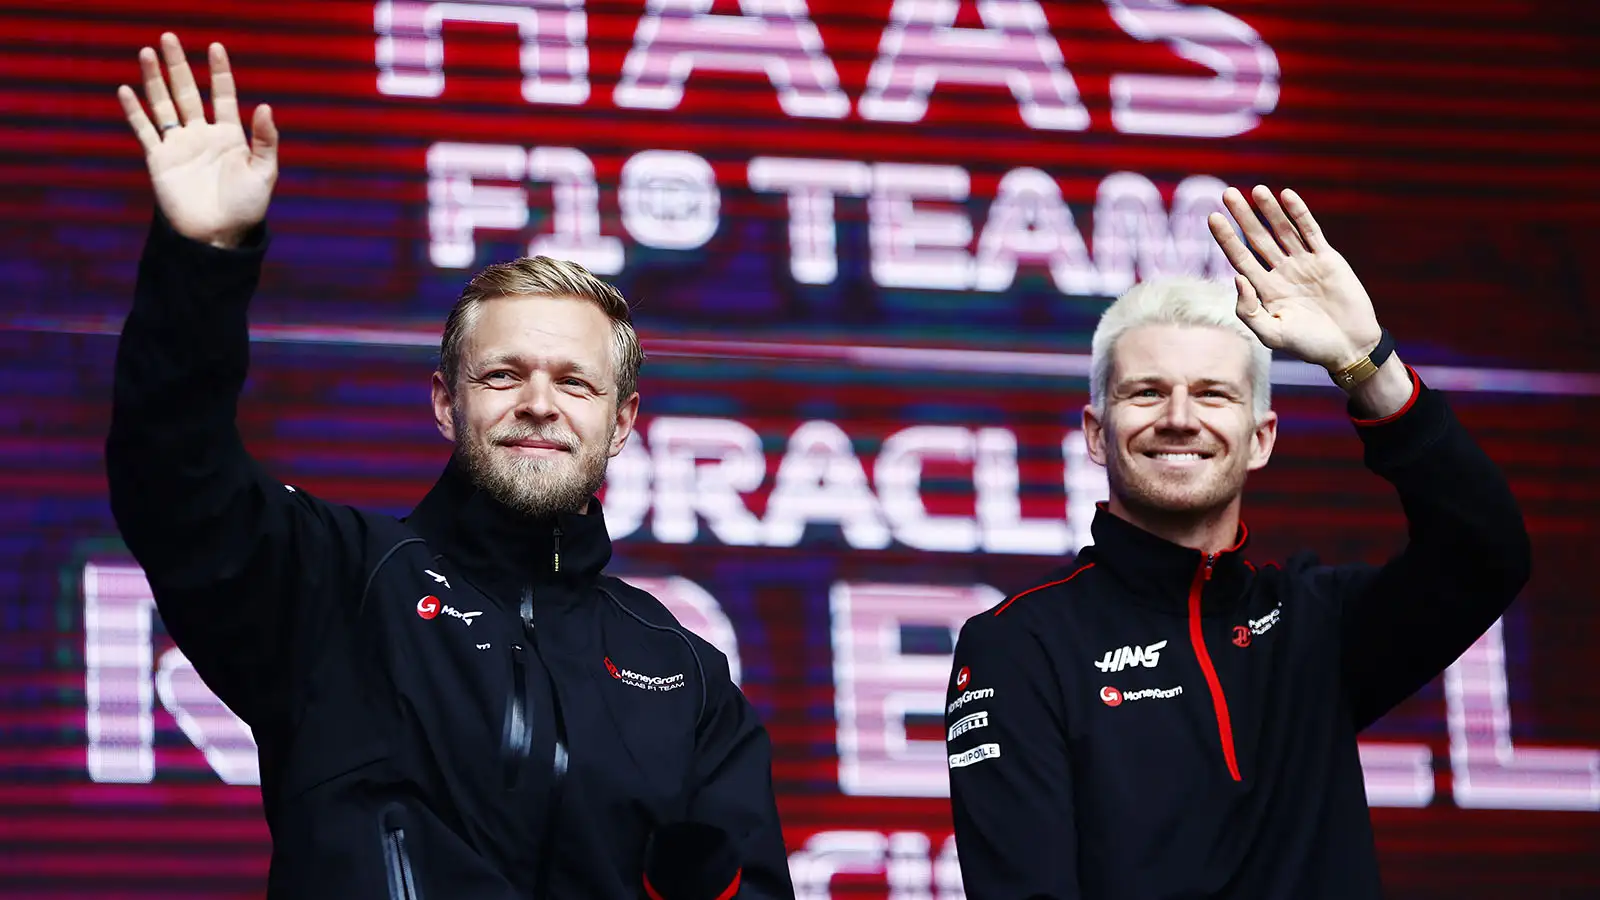 Kevin Magnussen and Nico Hulkenberg wave to the fans at the Belgian Grand Prix.